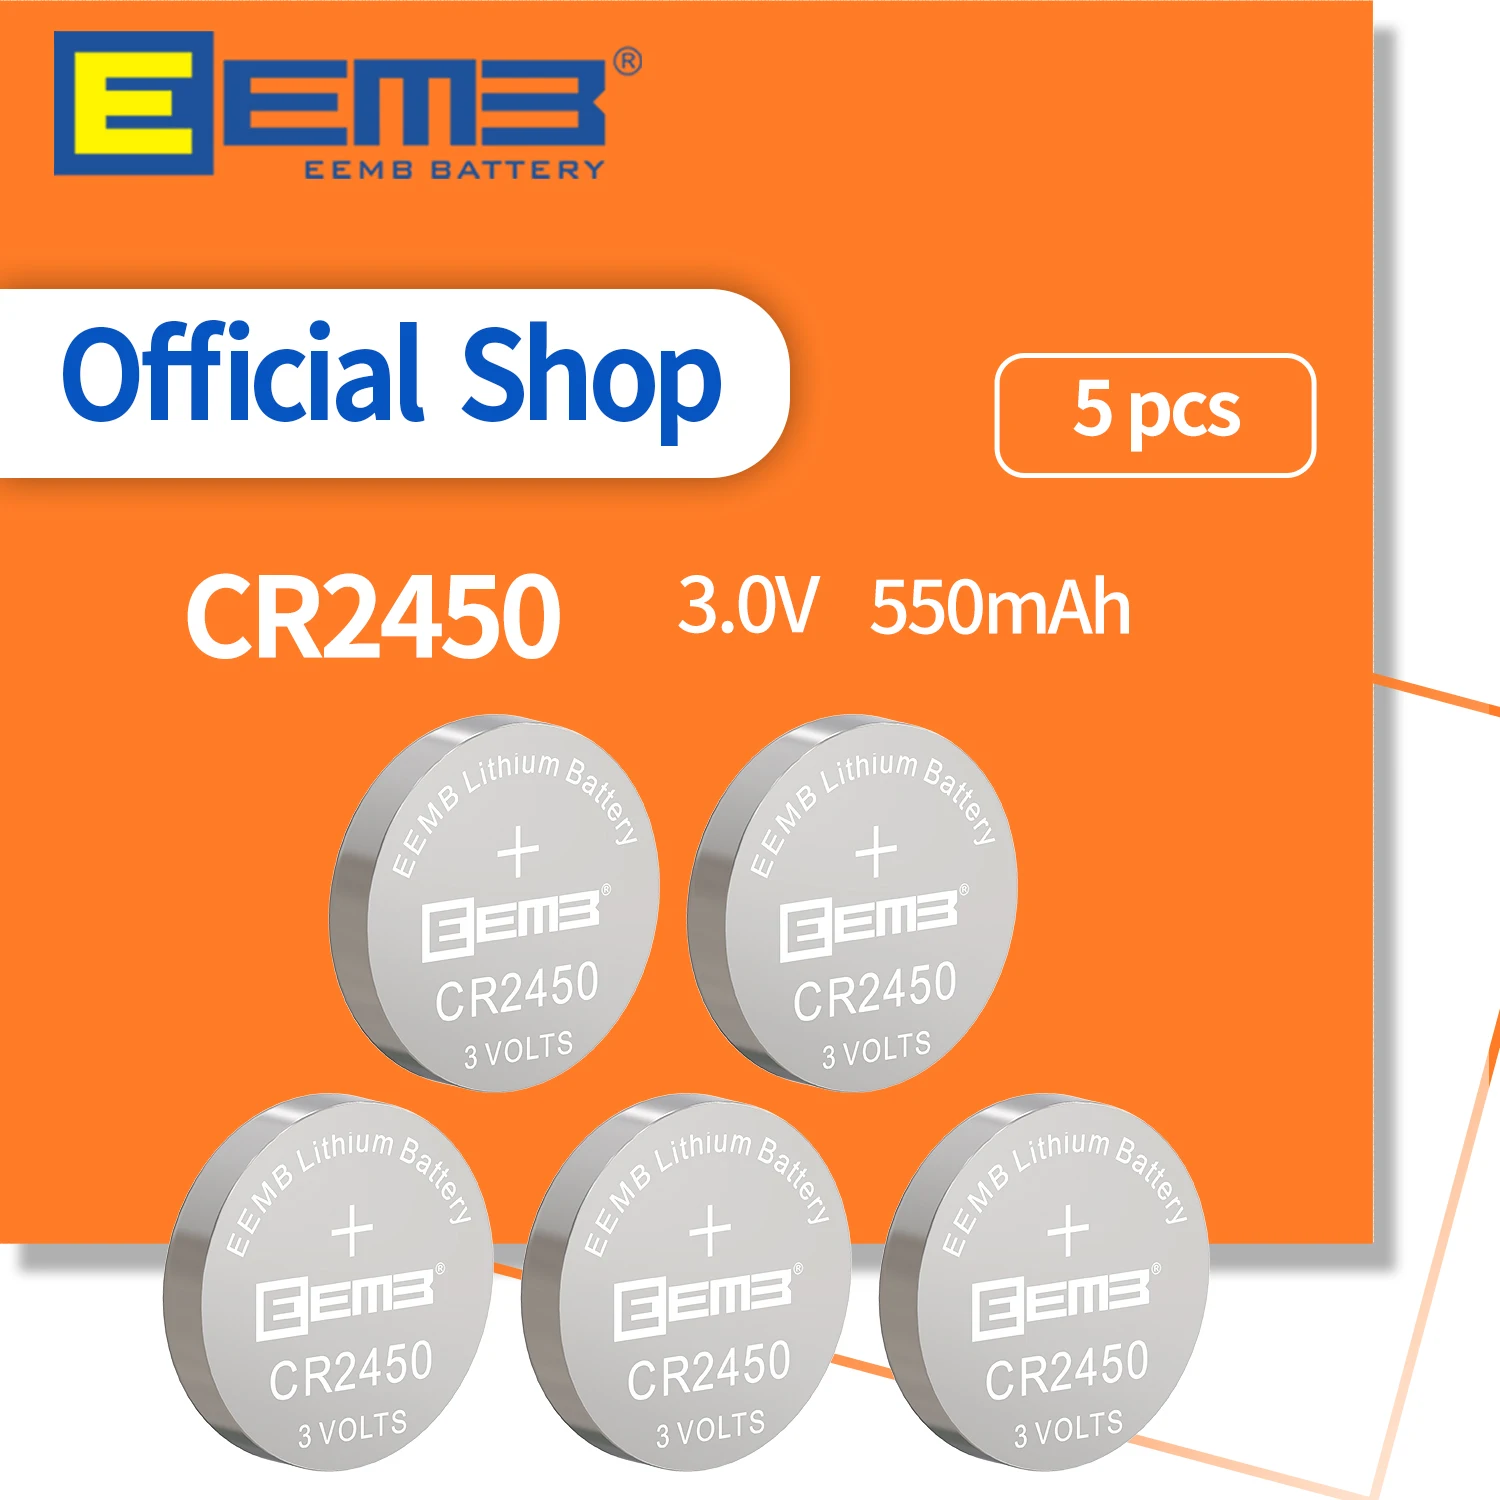 EEMB 5PCS CR2450 Button Battery 2450 3V 550mAh Lithium Battery Coin Cell Batteries for Toy Watch Calculator Remote Car Keys